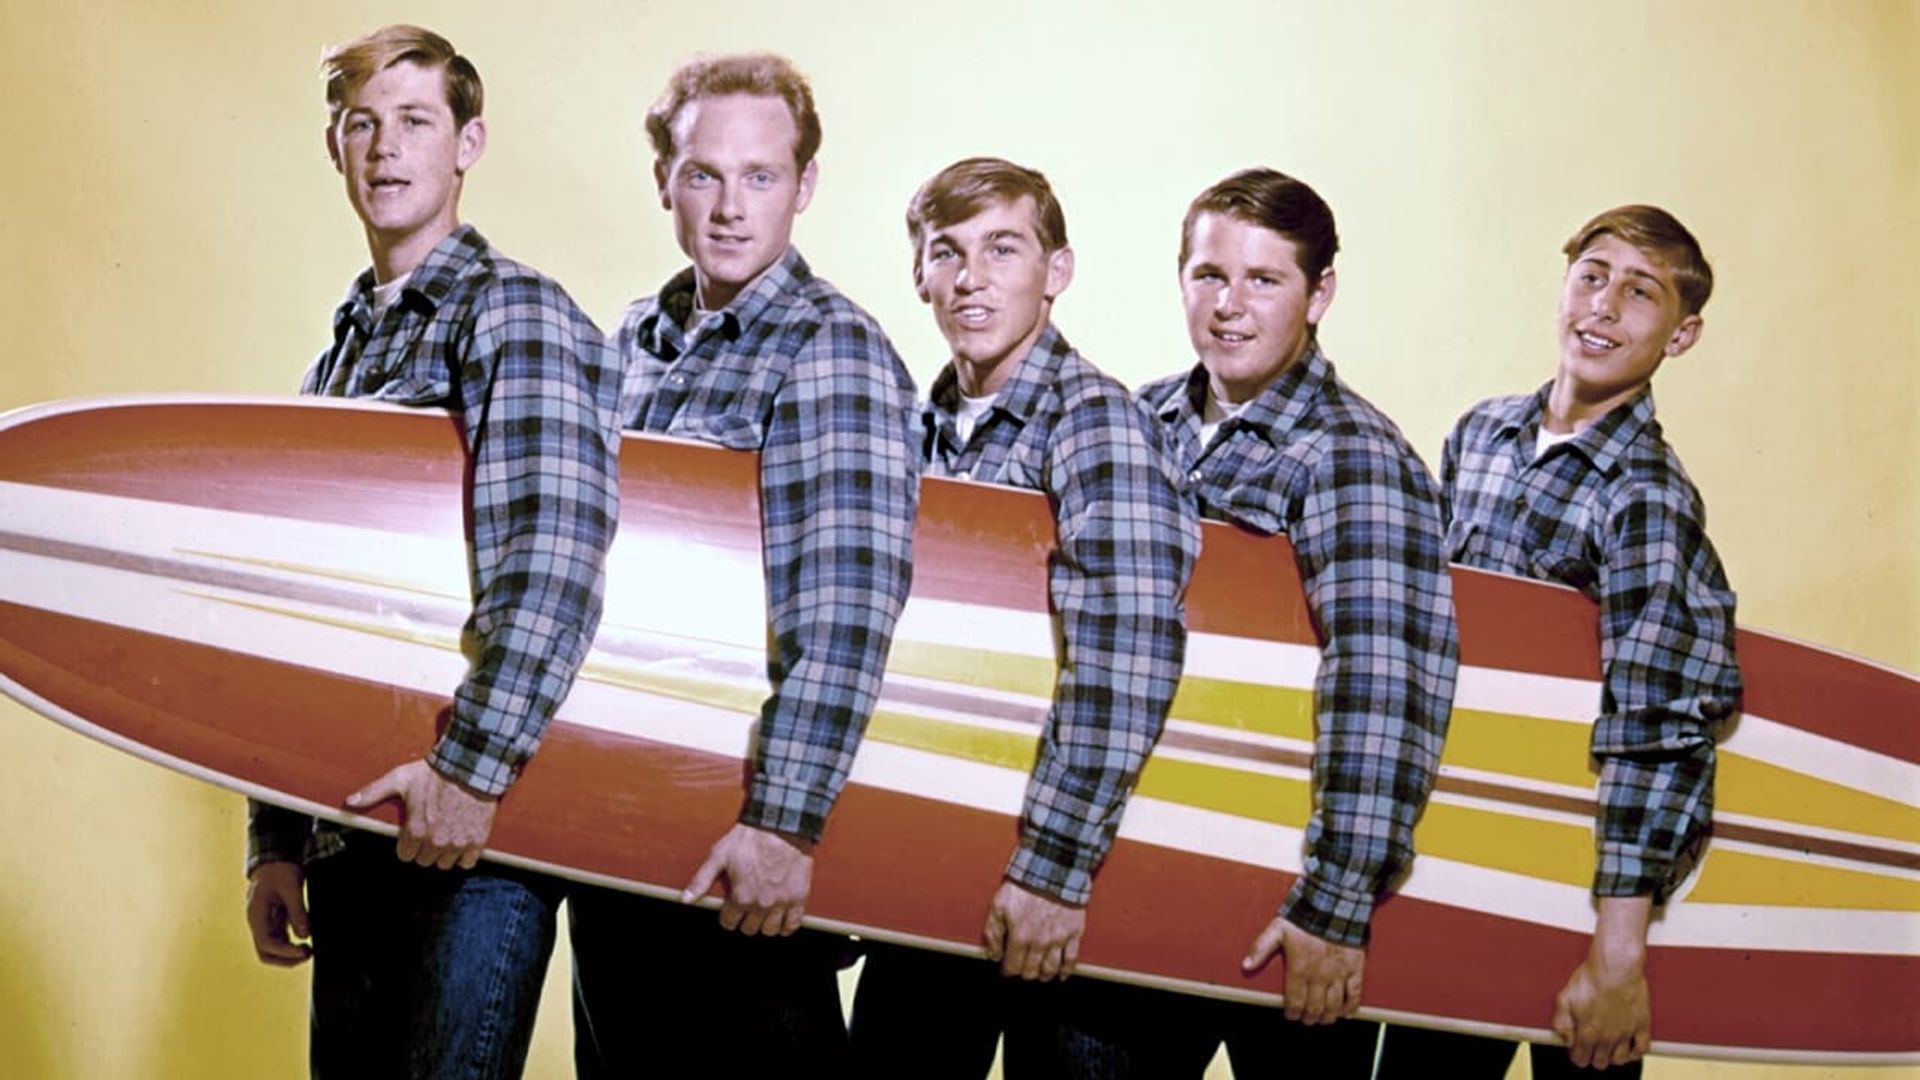 The Beach Boys: Live at Knebworth background